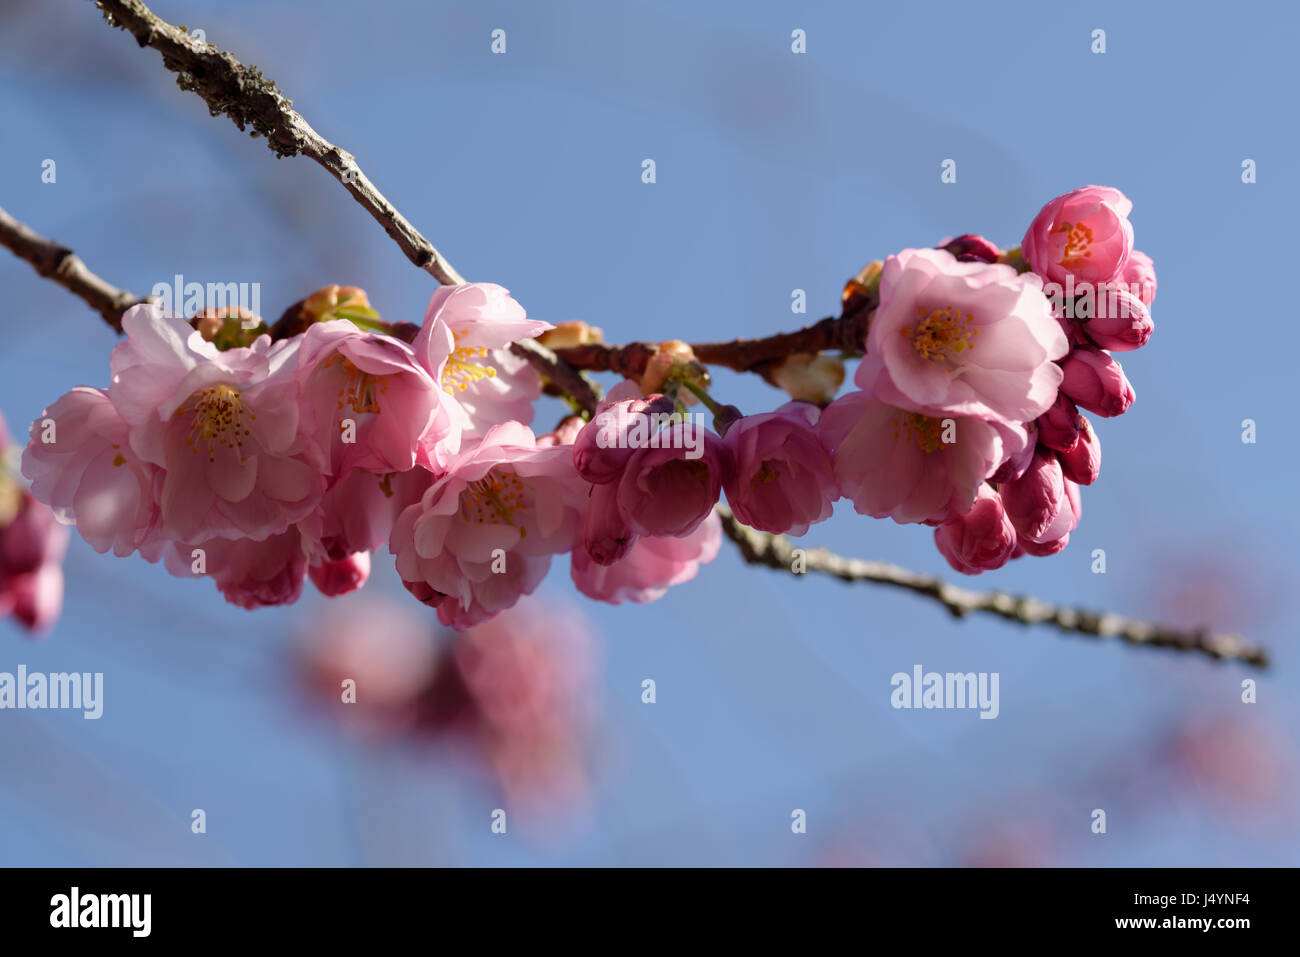 The blue of the sky is in contrast to the pink of the blossums on a branch a cherry tree (Prunus avium) Stock Photo